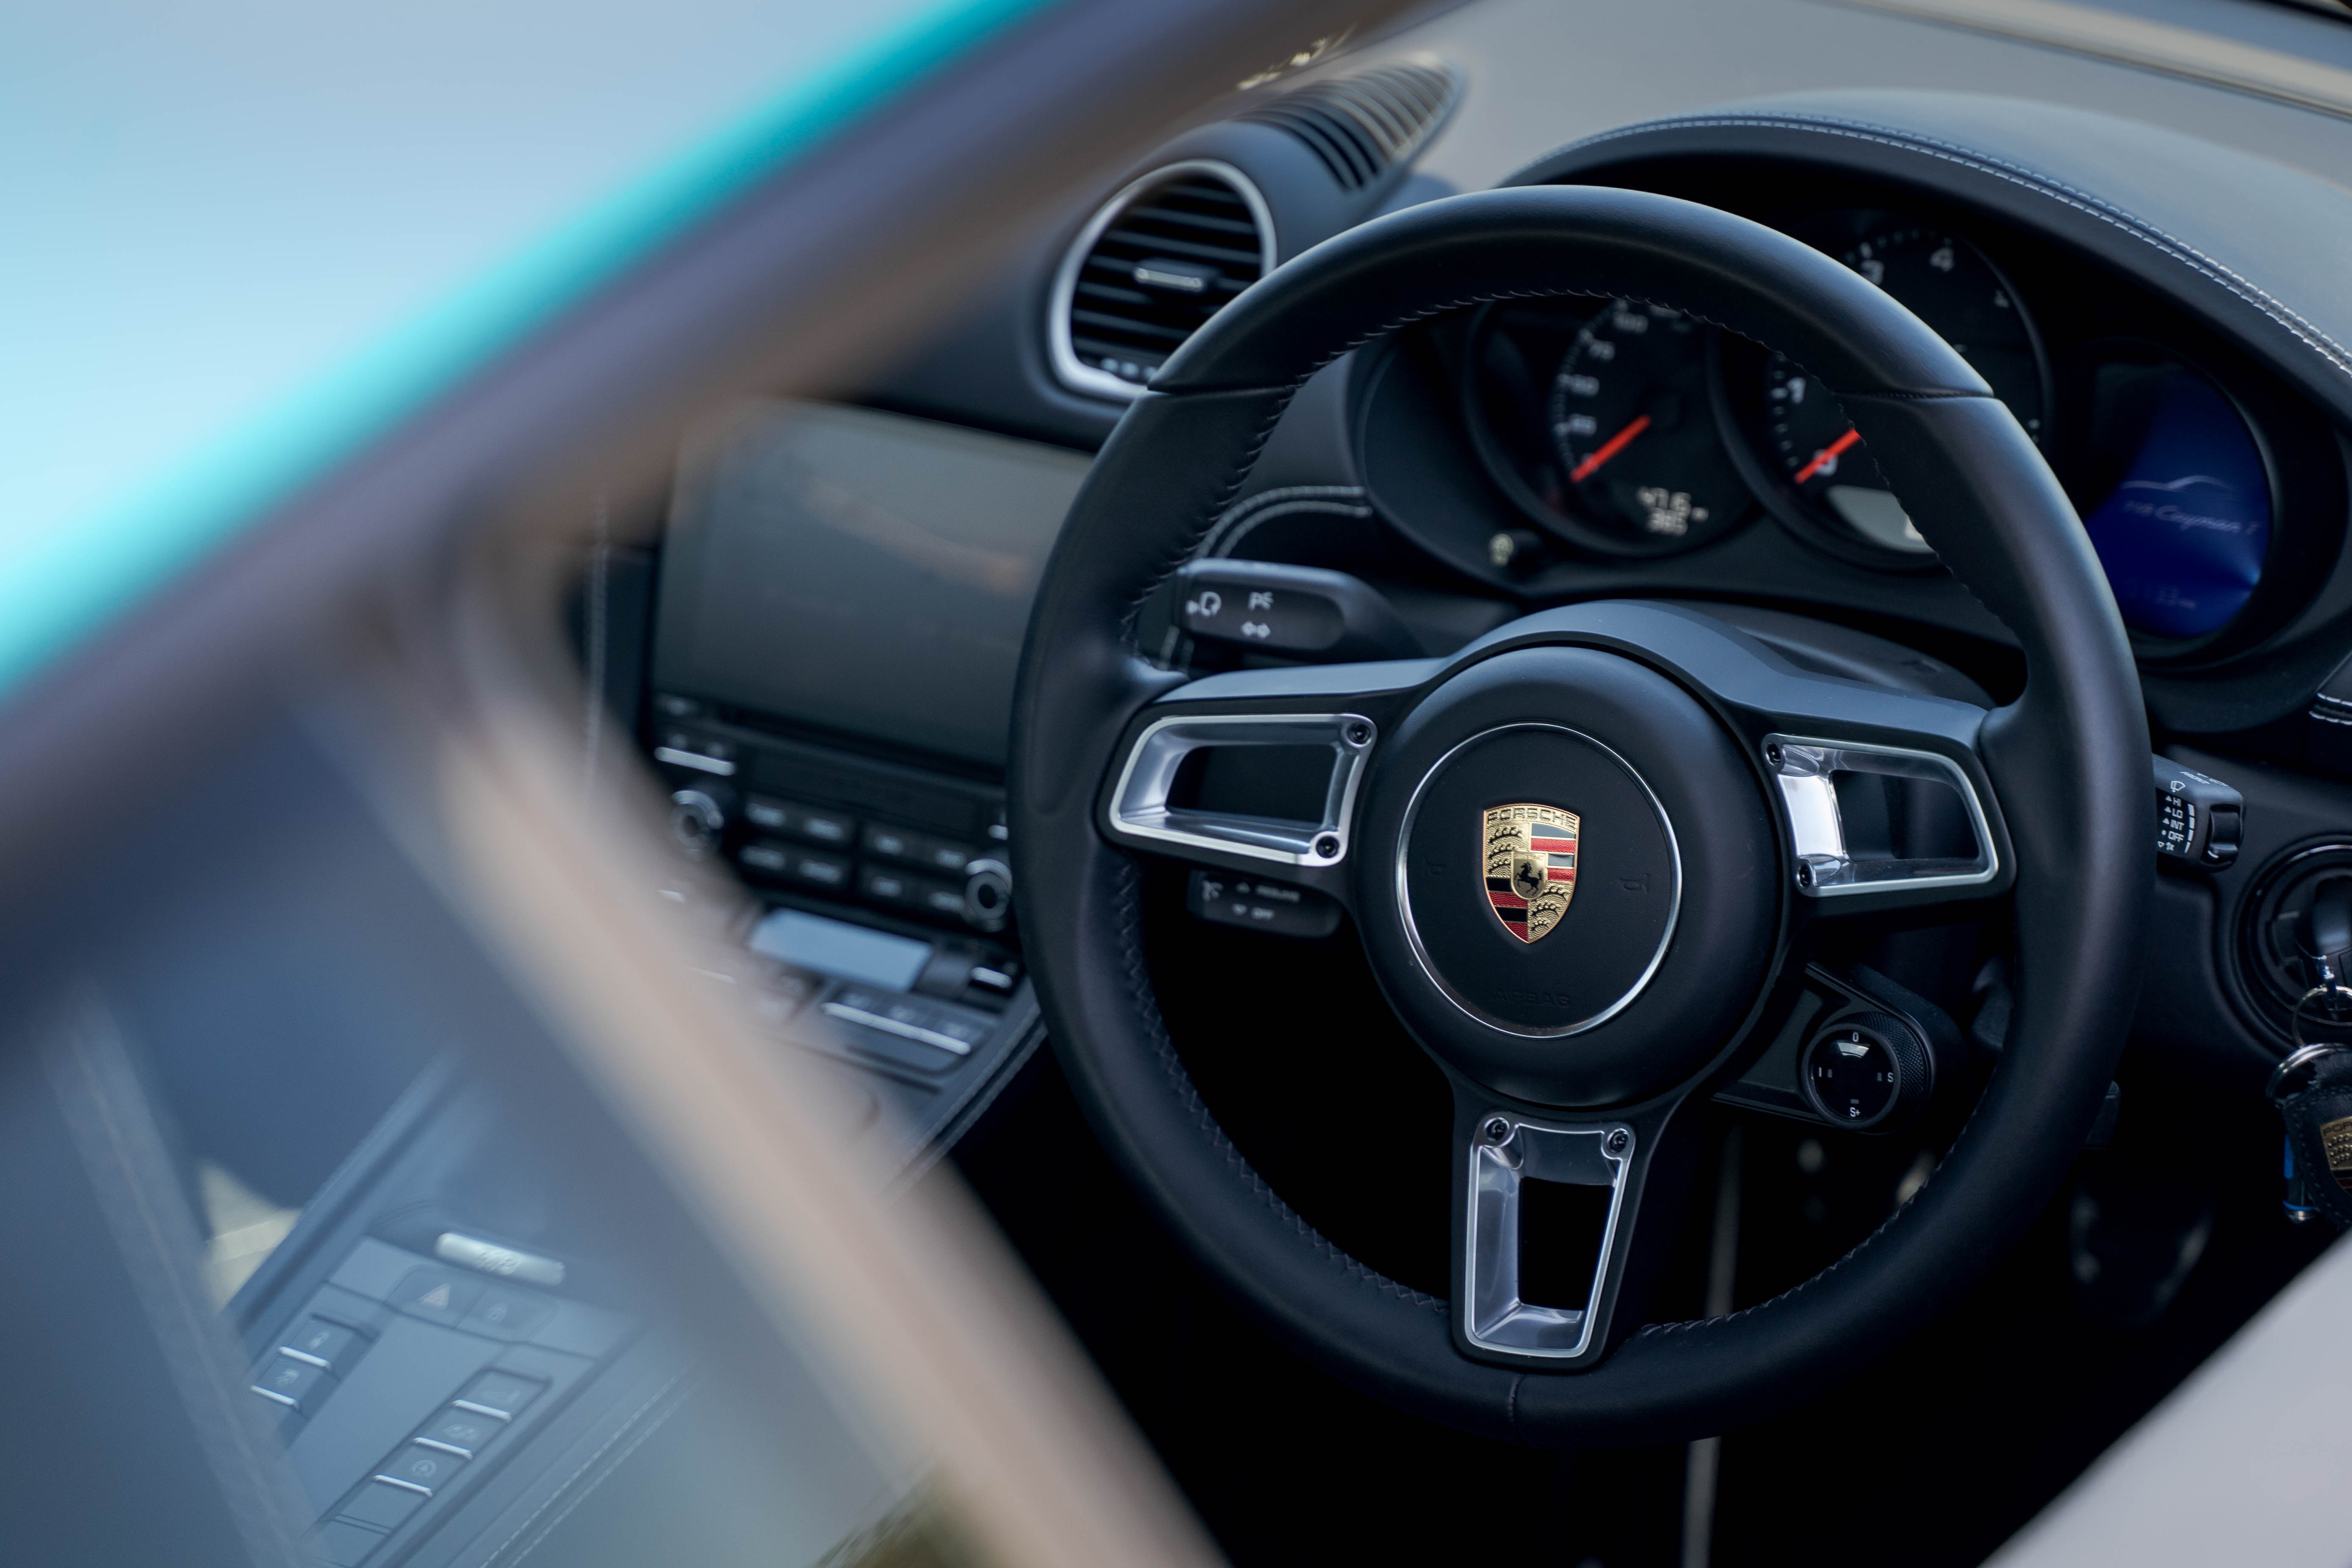 The Porsche's interior remains one of the best on the market 